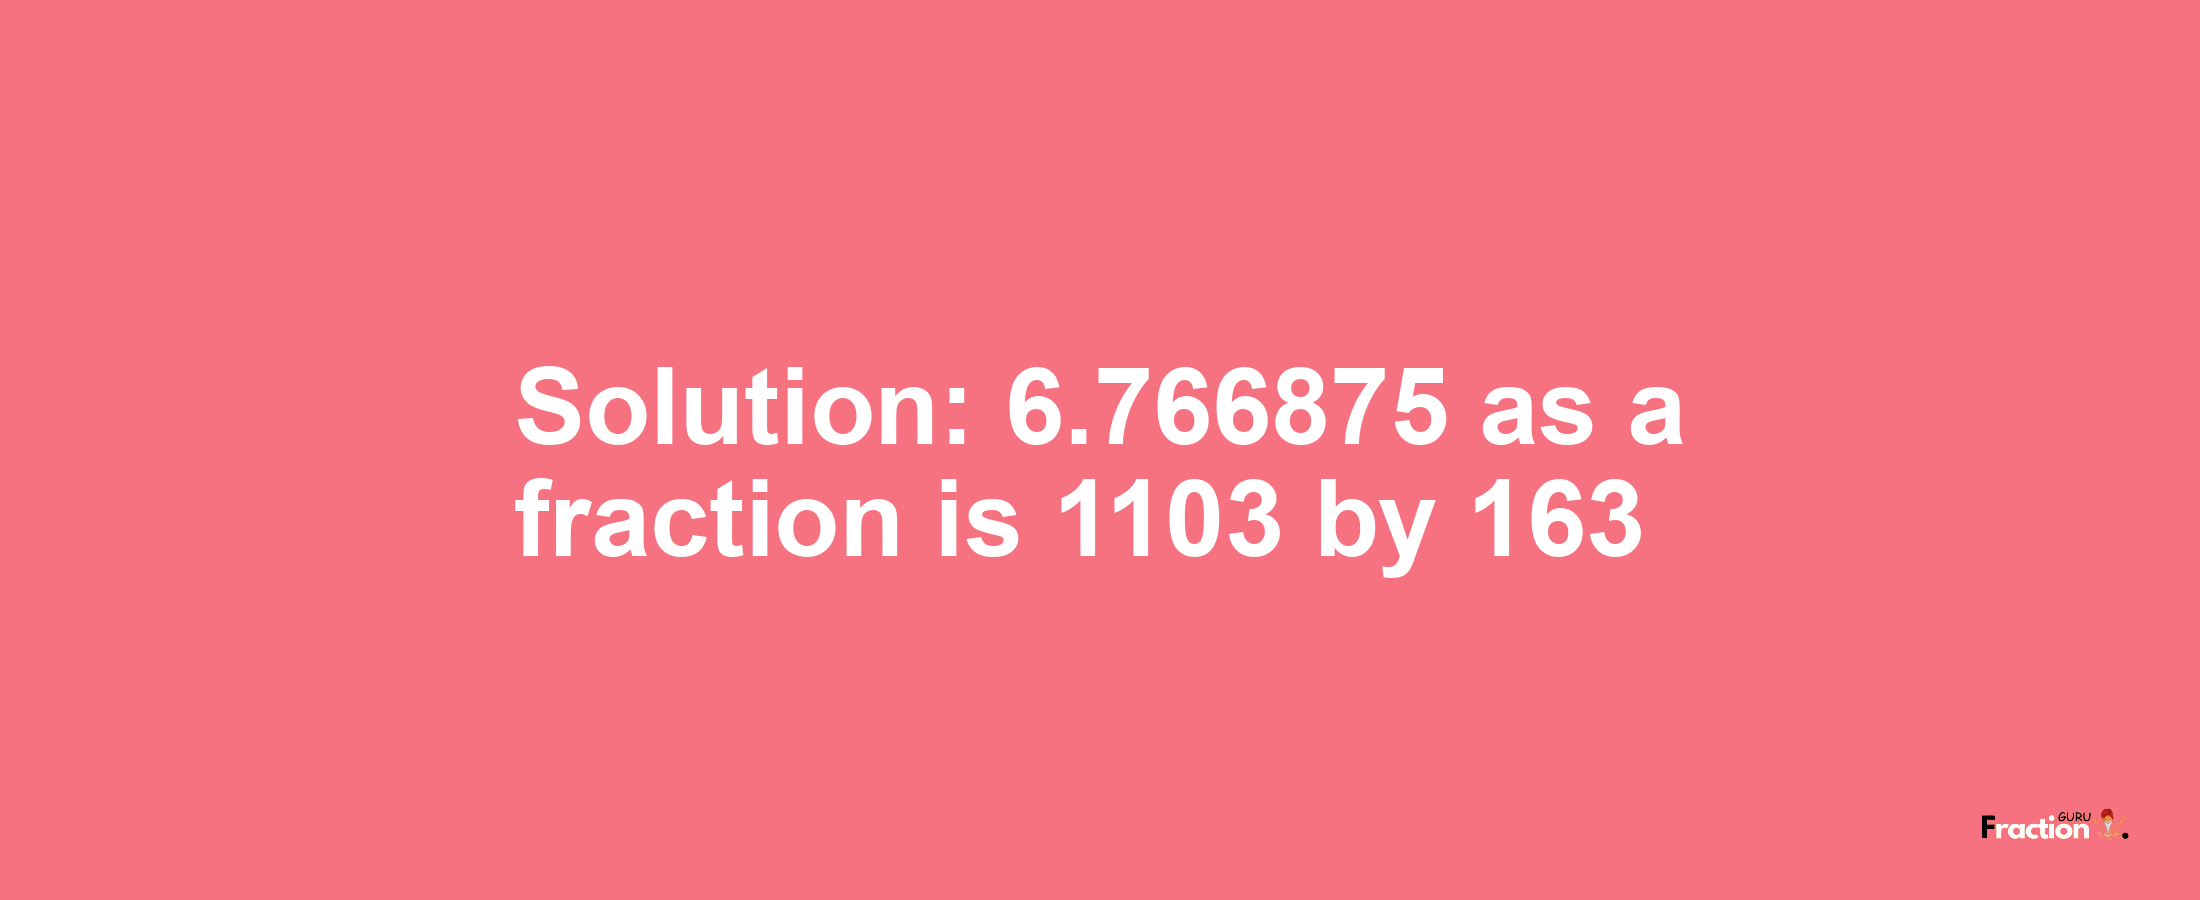 Solution:6.766875 as a fraction is 1103/163